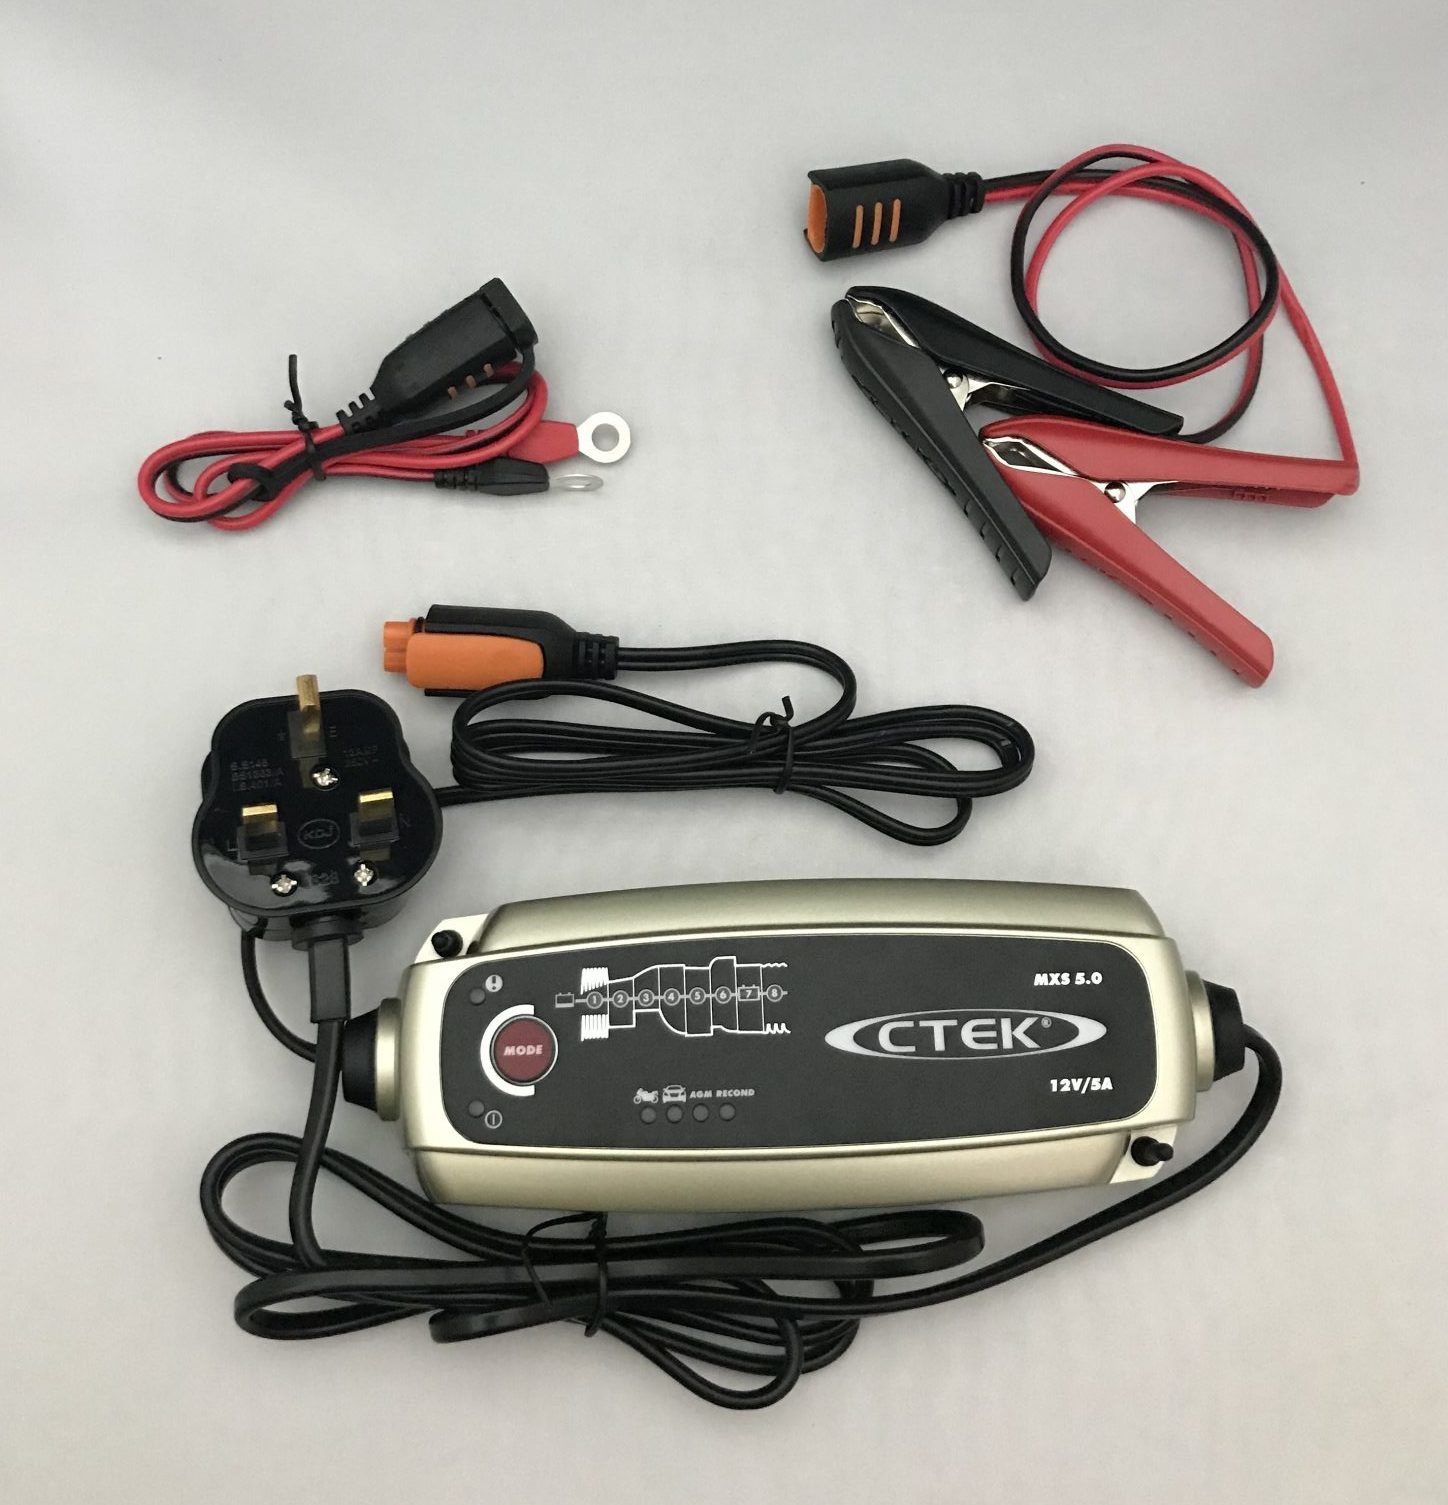 CTEK MXS 5.0 BATTERY CHARGER AND MAINTAINER